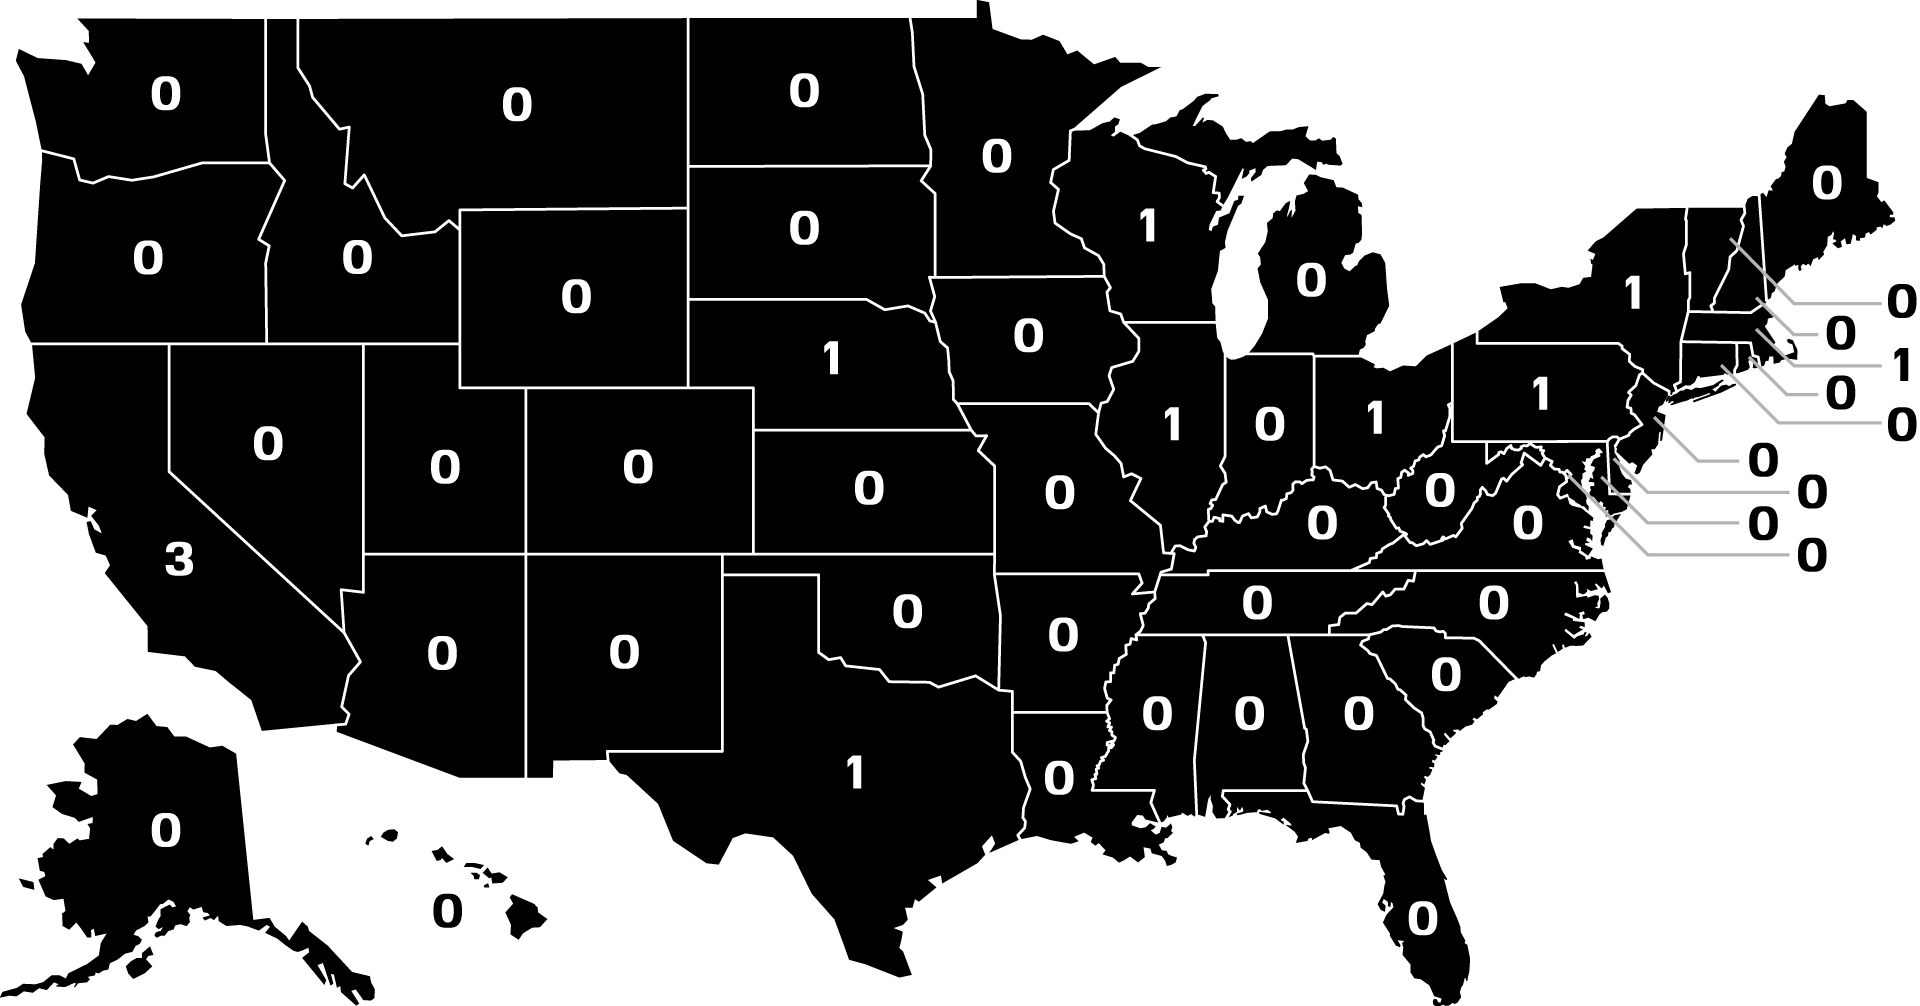 a map of the United States with the number of Hate Music groups in each state